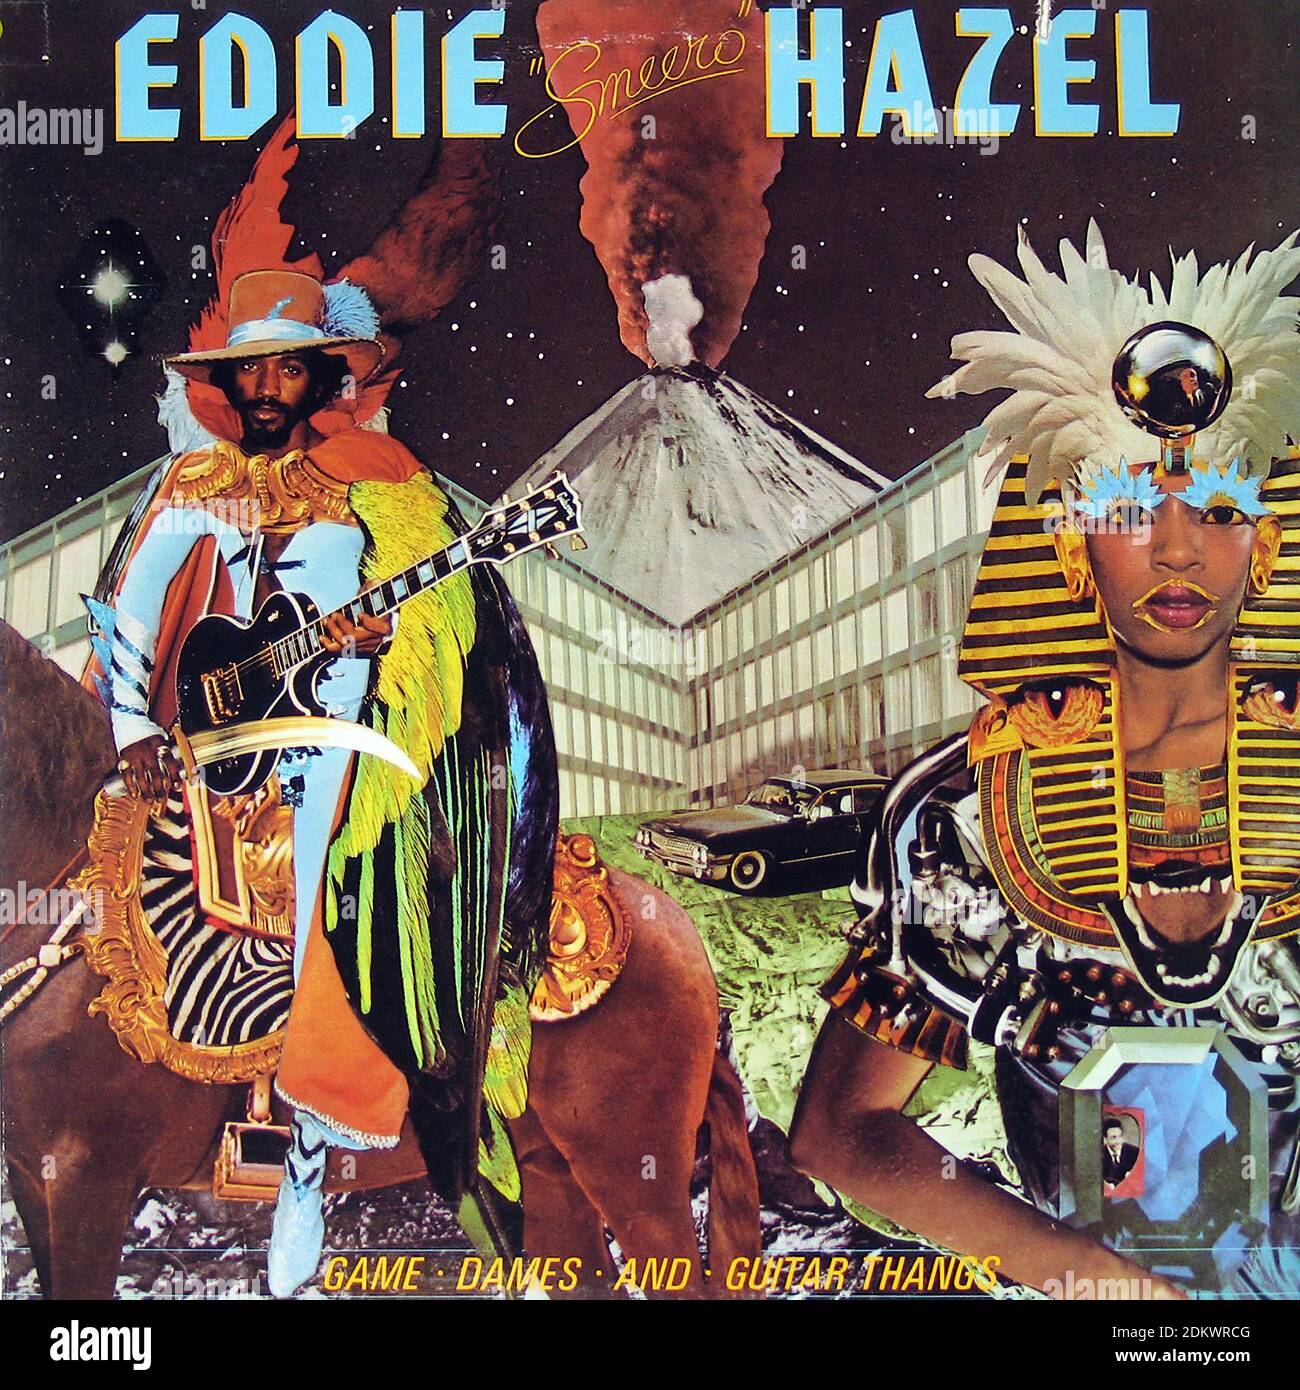 Eddie Hazel Game Dames and Guitar Thangs - Vintage Vinyl Record Cover Stock  Photo - Alamy